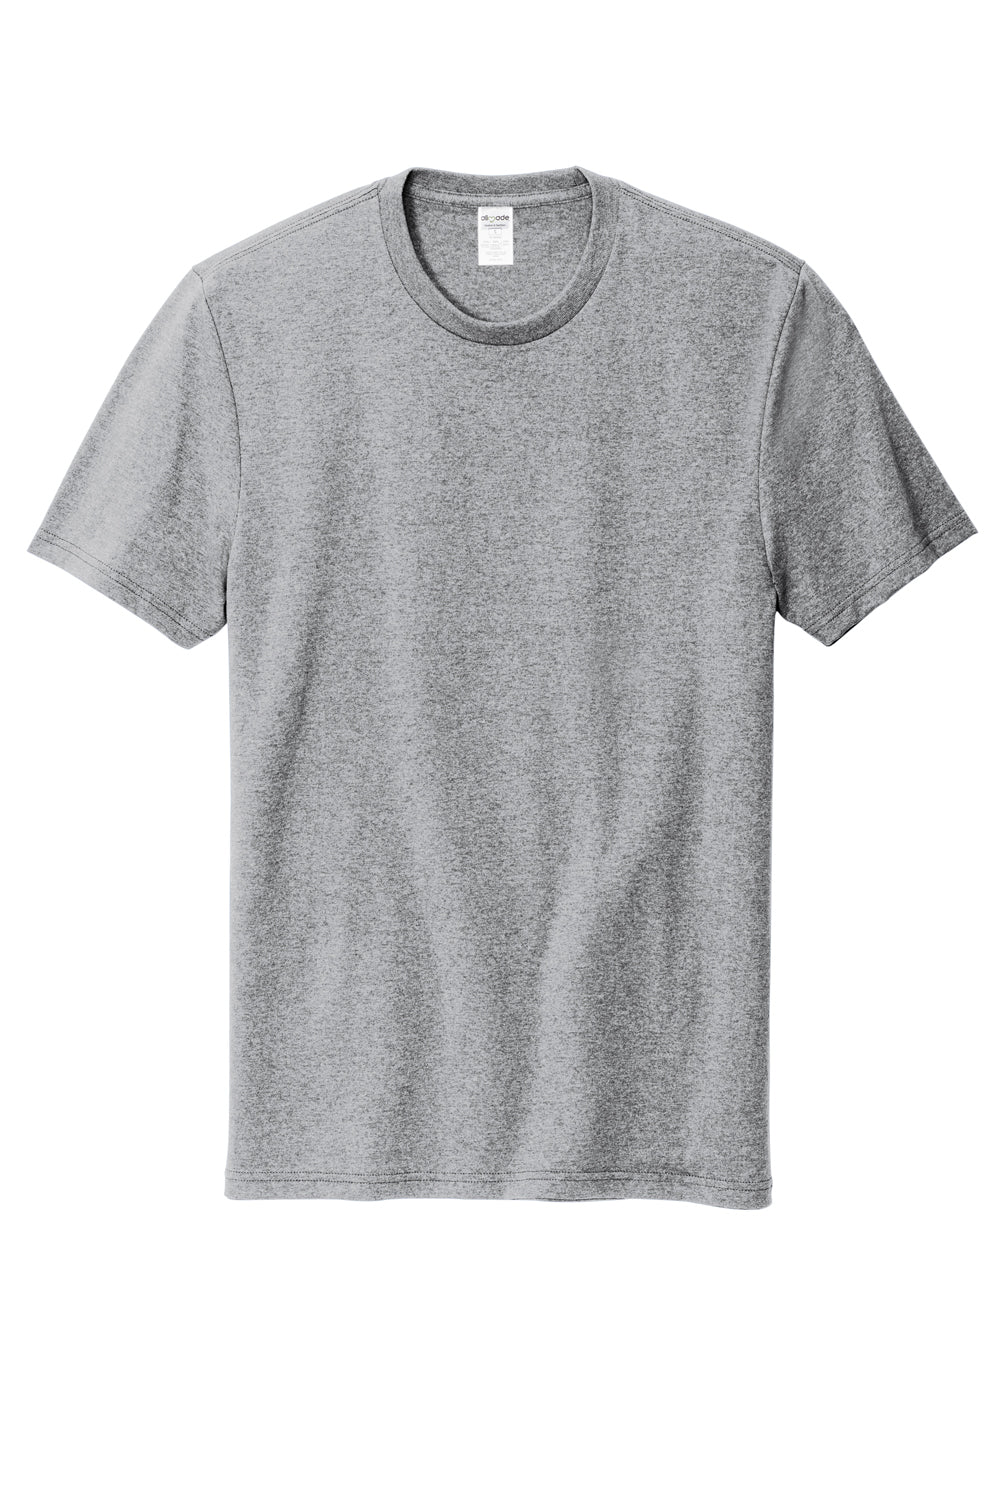 Allmade AL2300 Mens Recycled Short Sleeve Crewneck T-Shirt Heather Remade Grey Flat Front